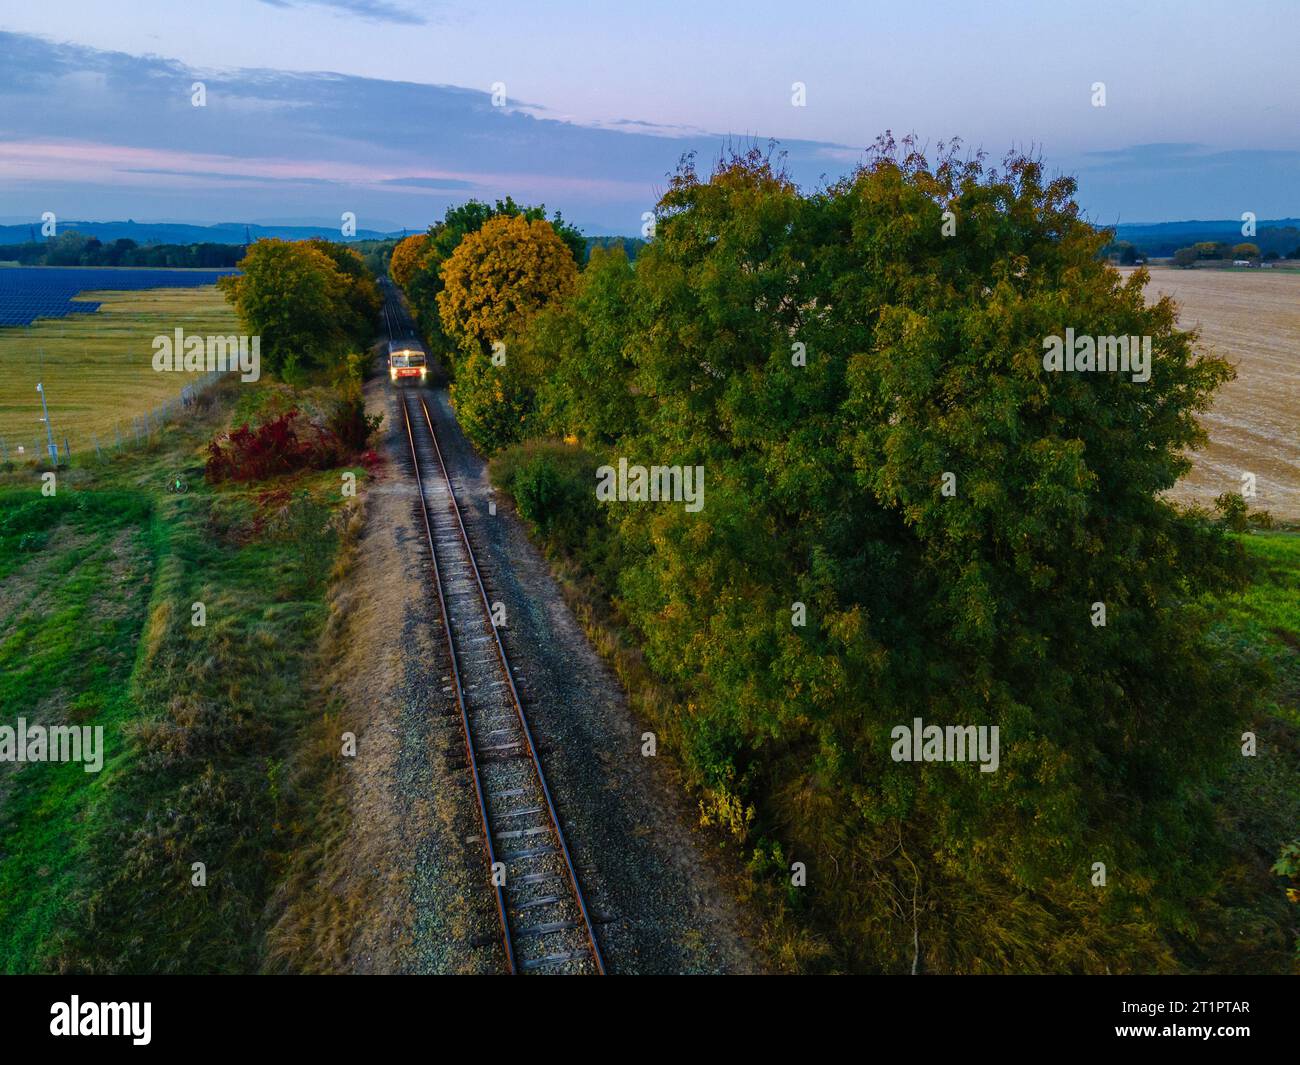 Drone footage of a railway track in an autumn environment with a moving train, Hungary Stock Photo